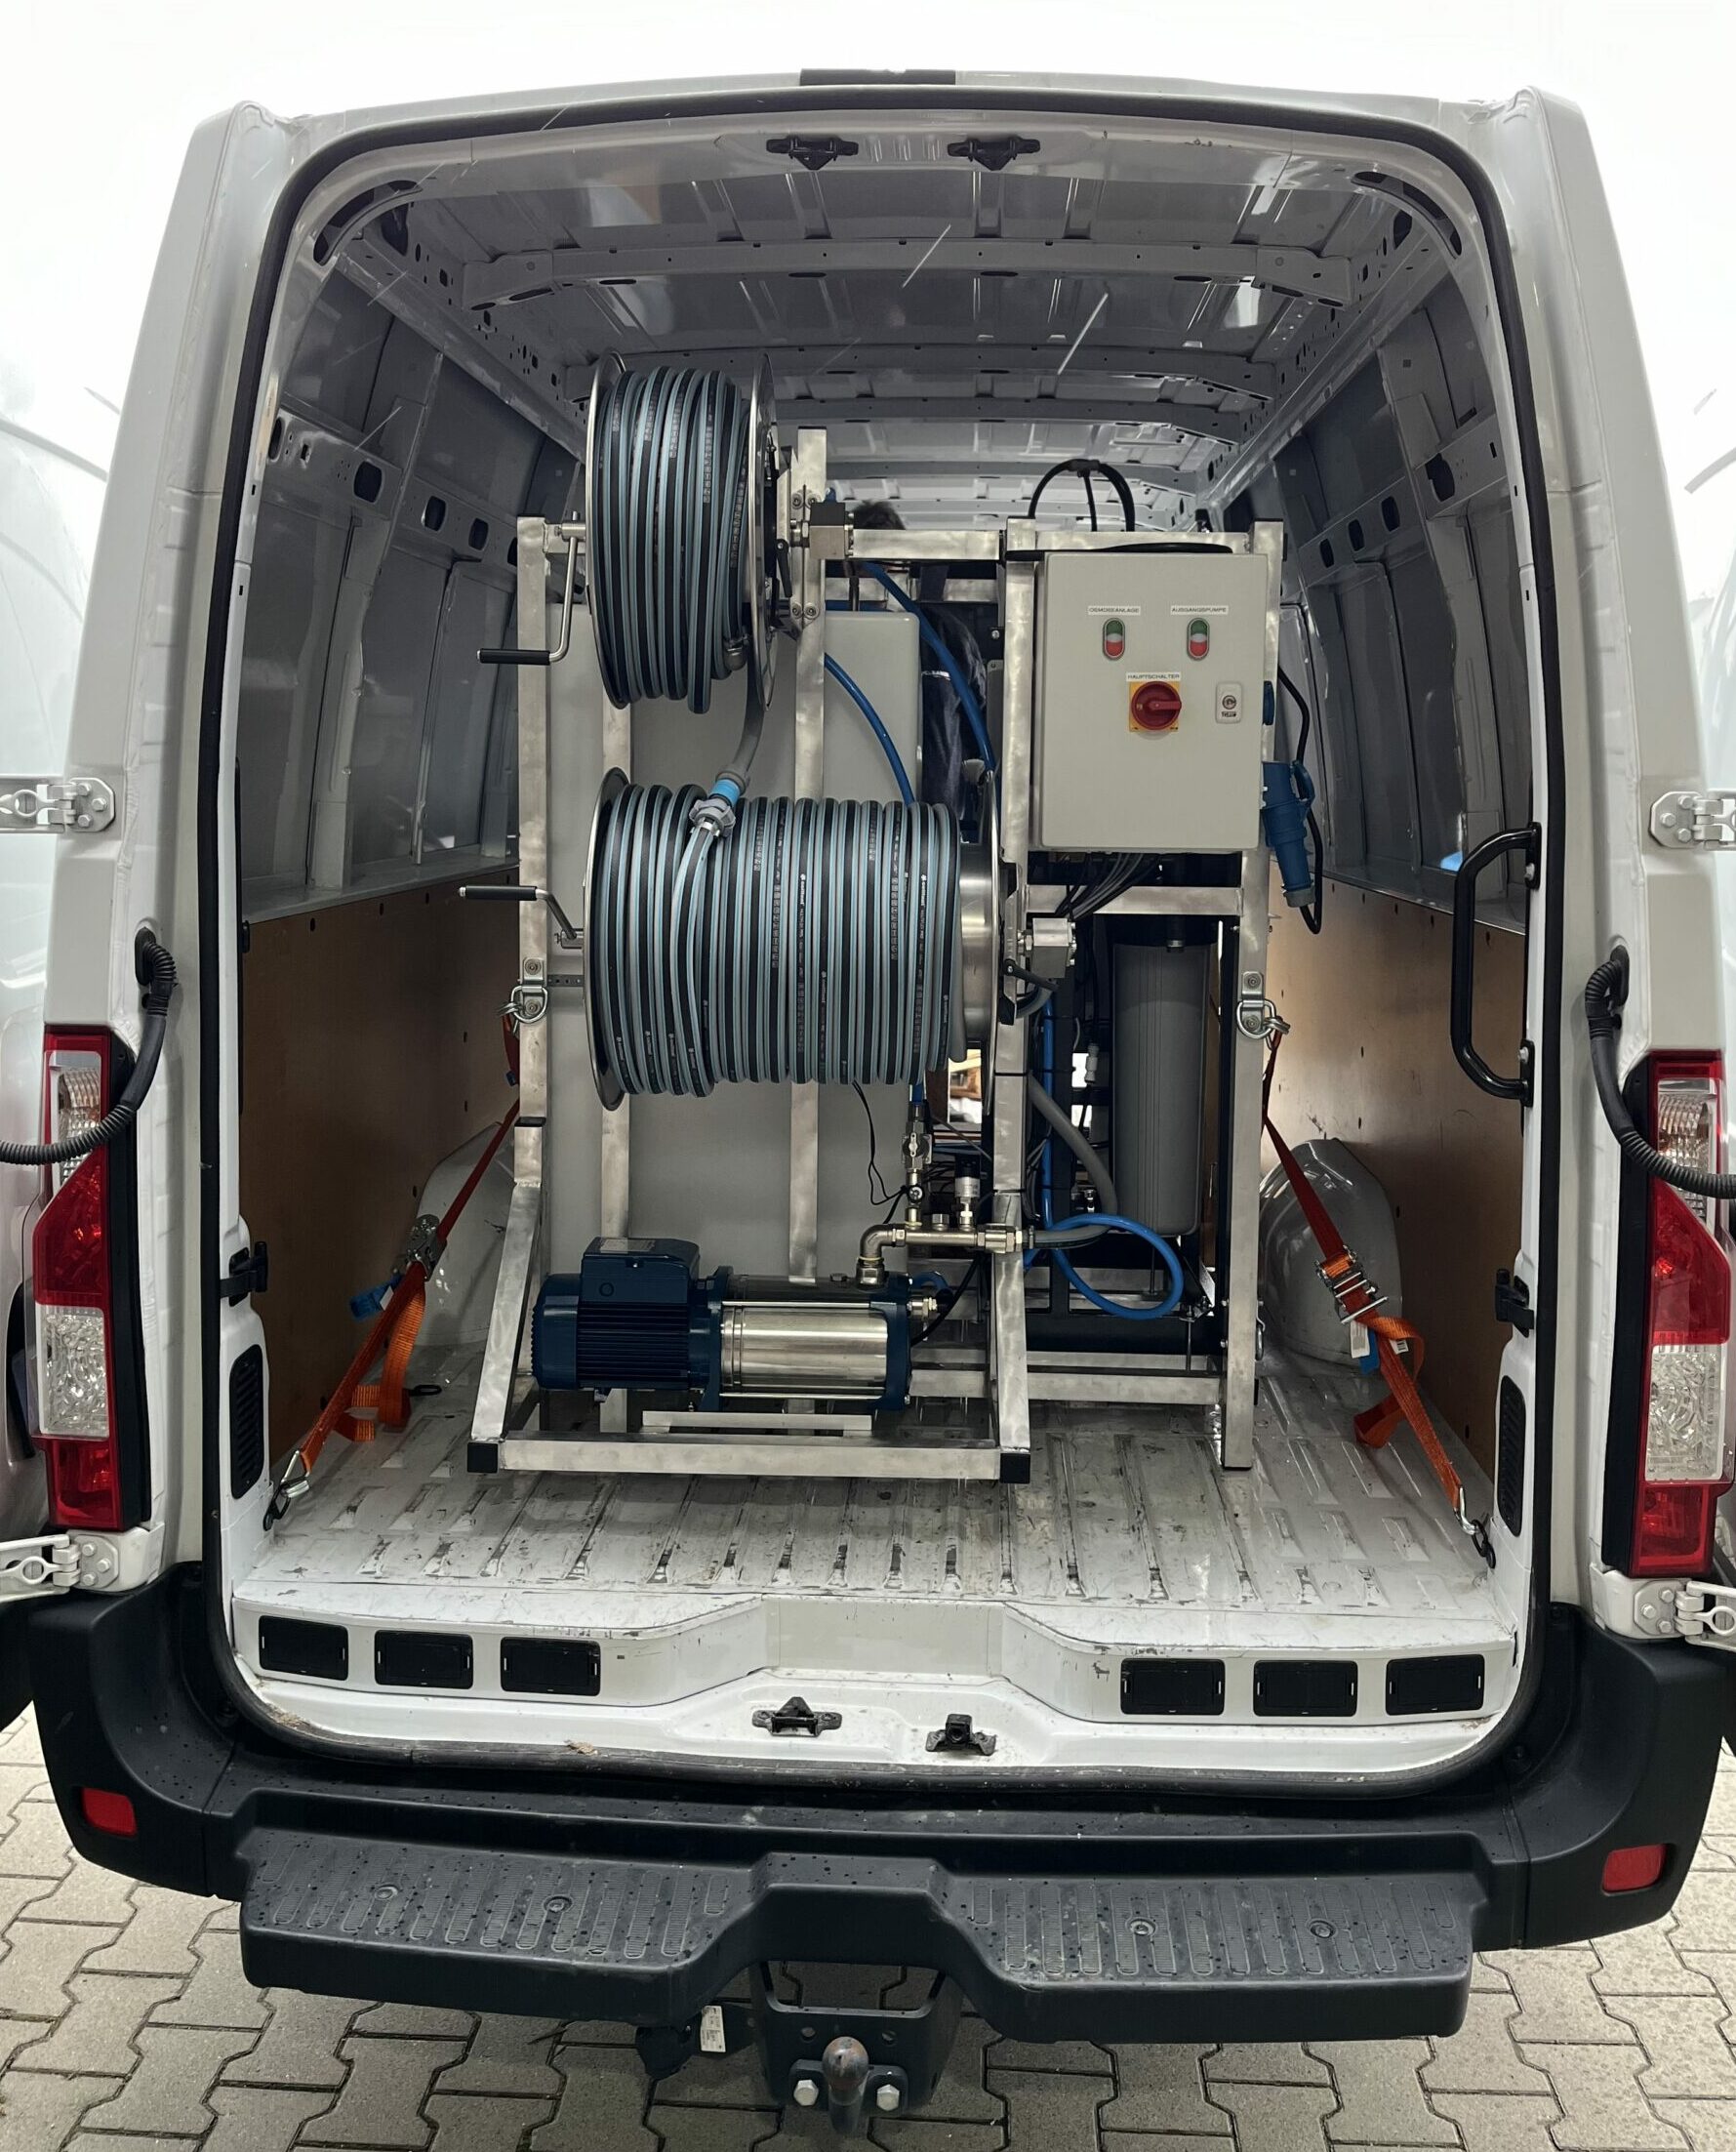 Van equipped with osmosis deep cleaning system